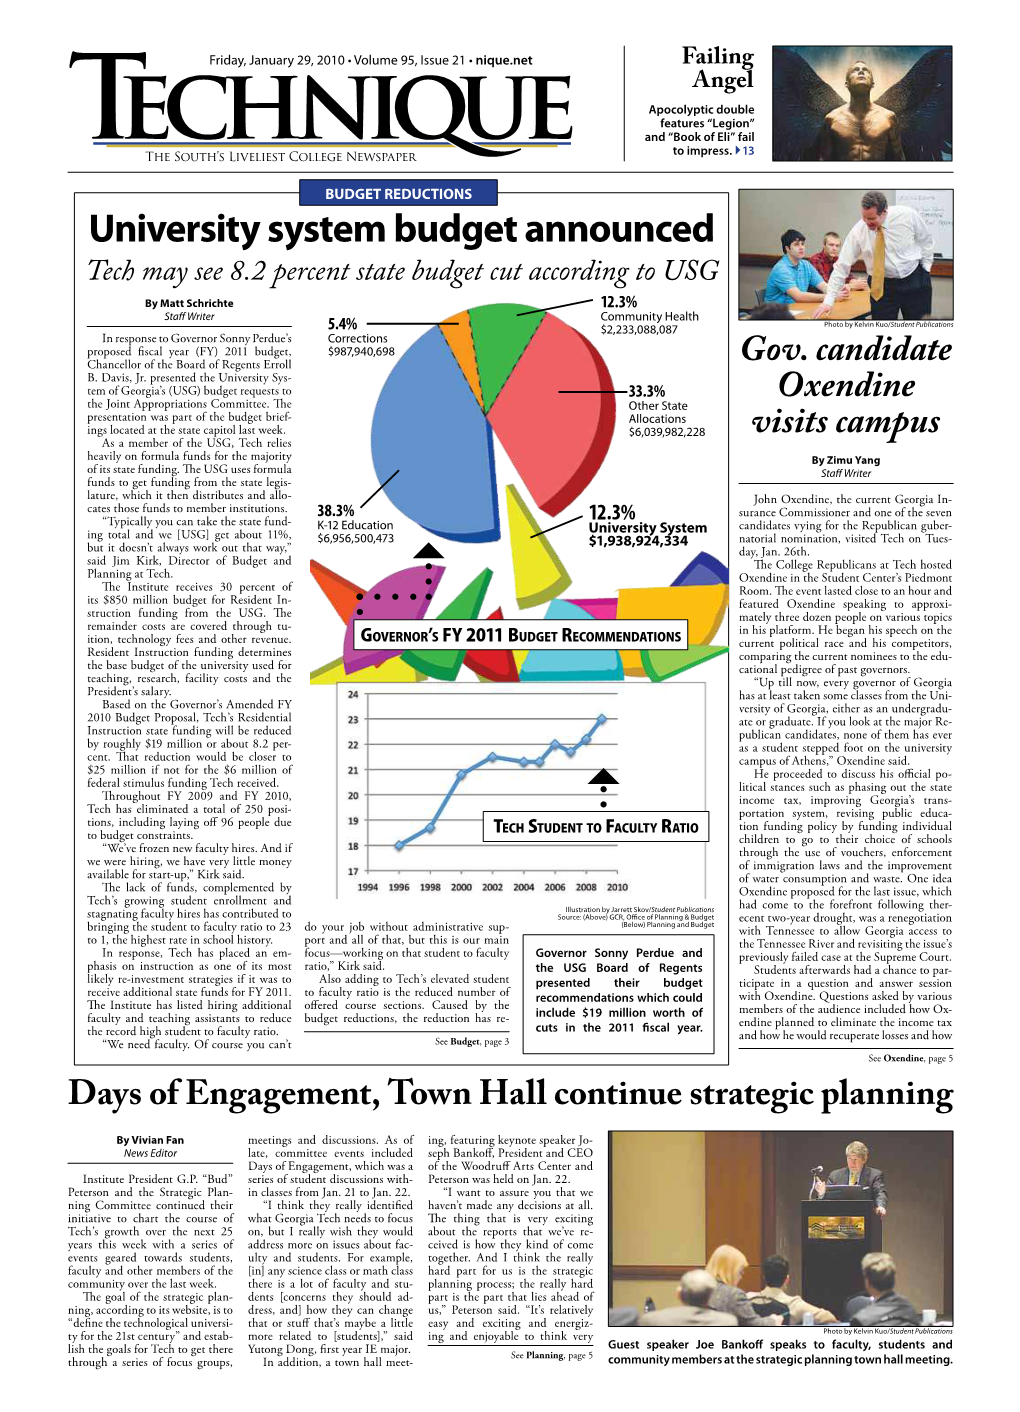 University System Budget Announced